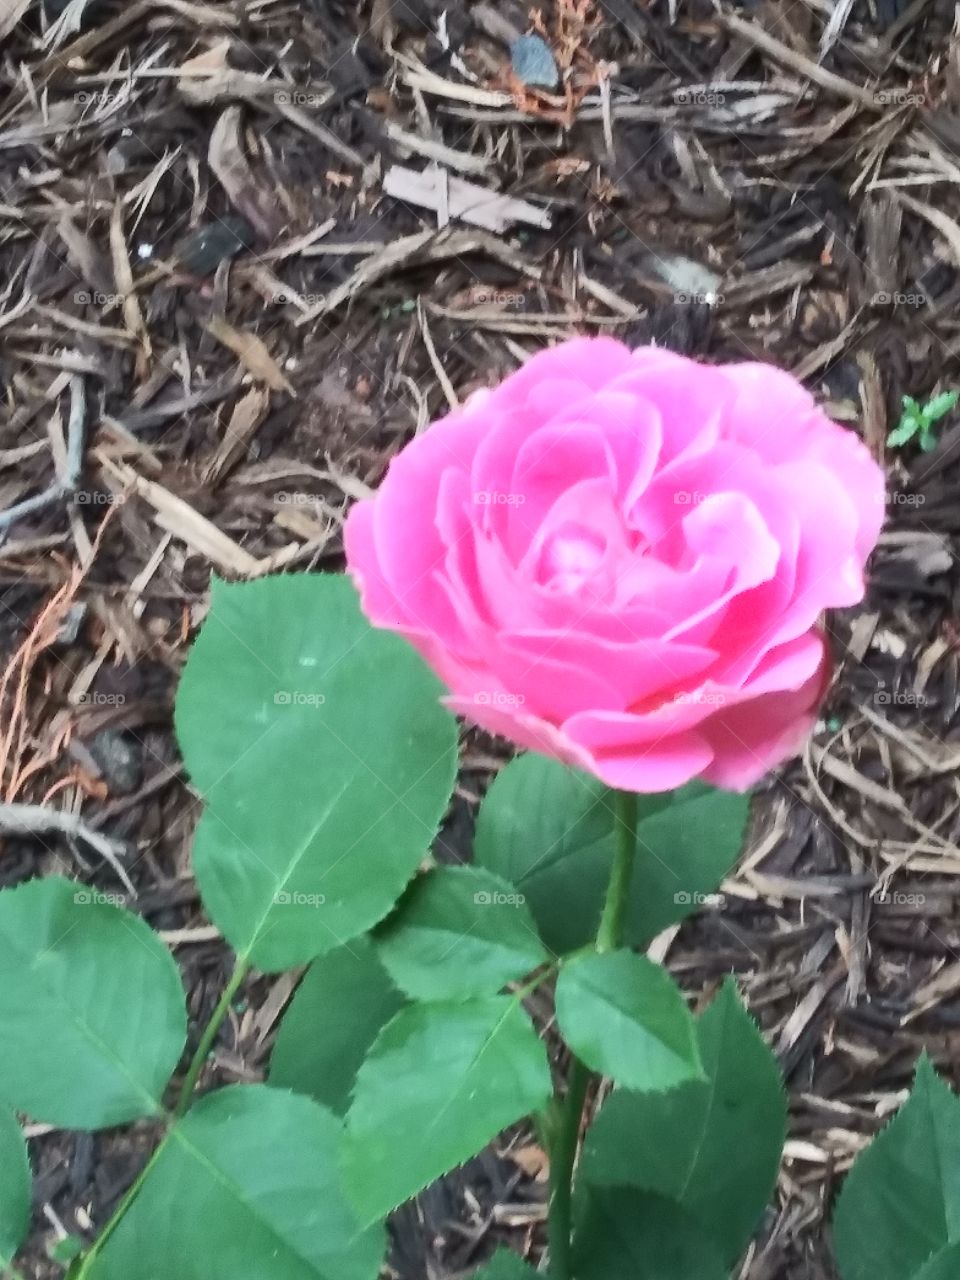 A solitary rose